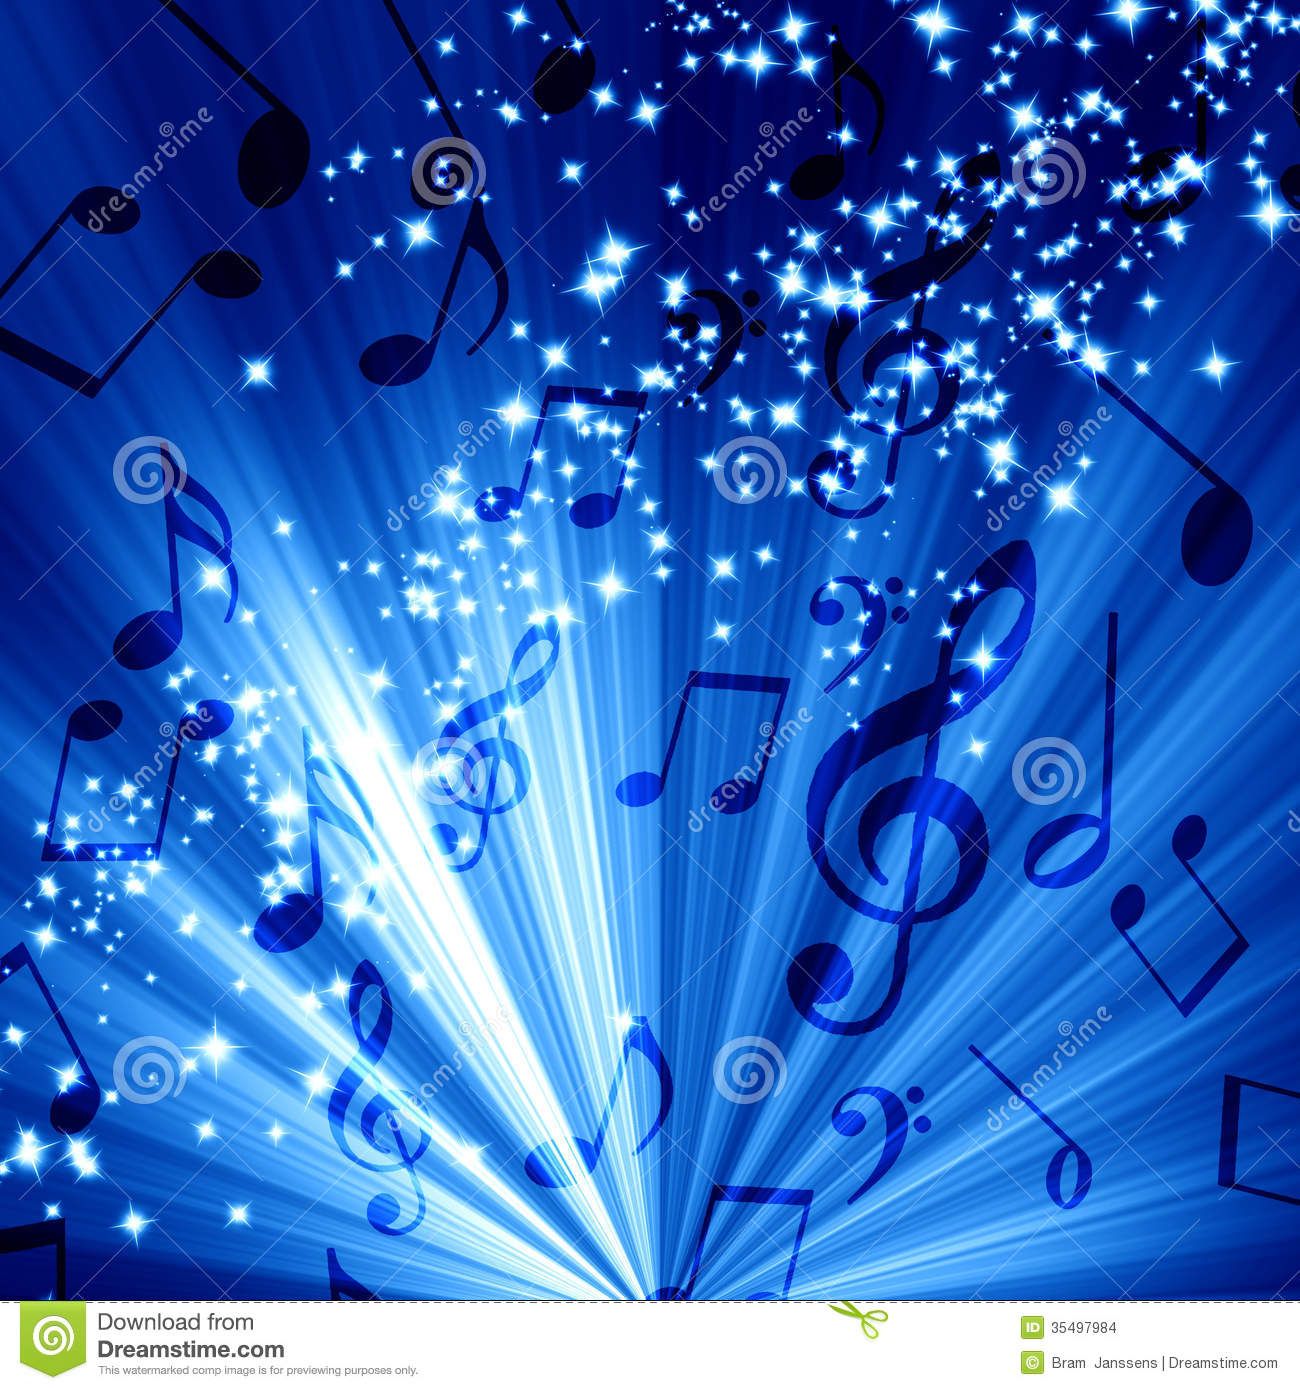 Music Note Background Blue Hd Pictures 4 HD Wallpapers lzamgs